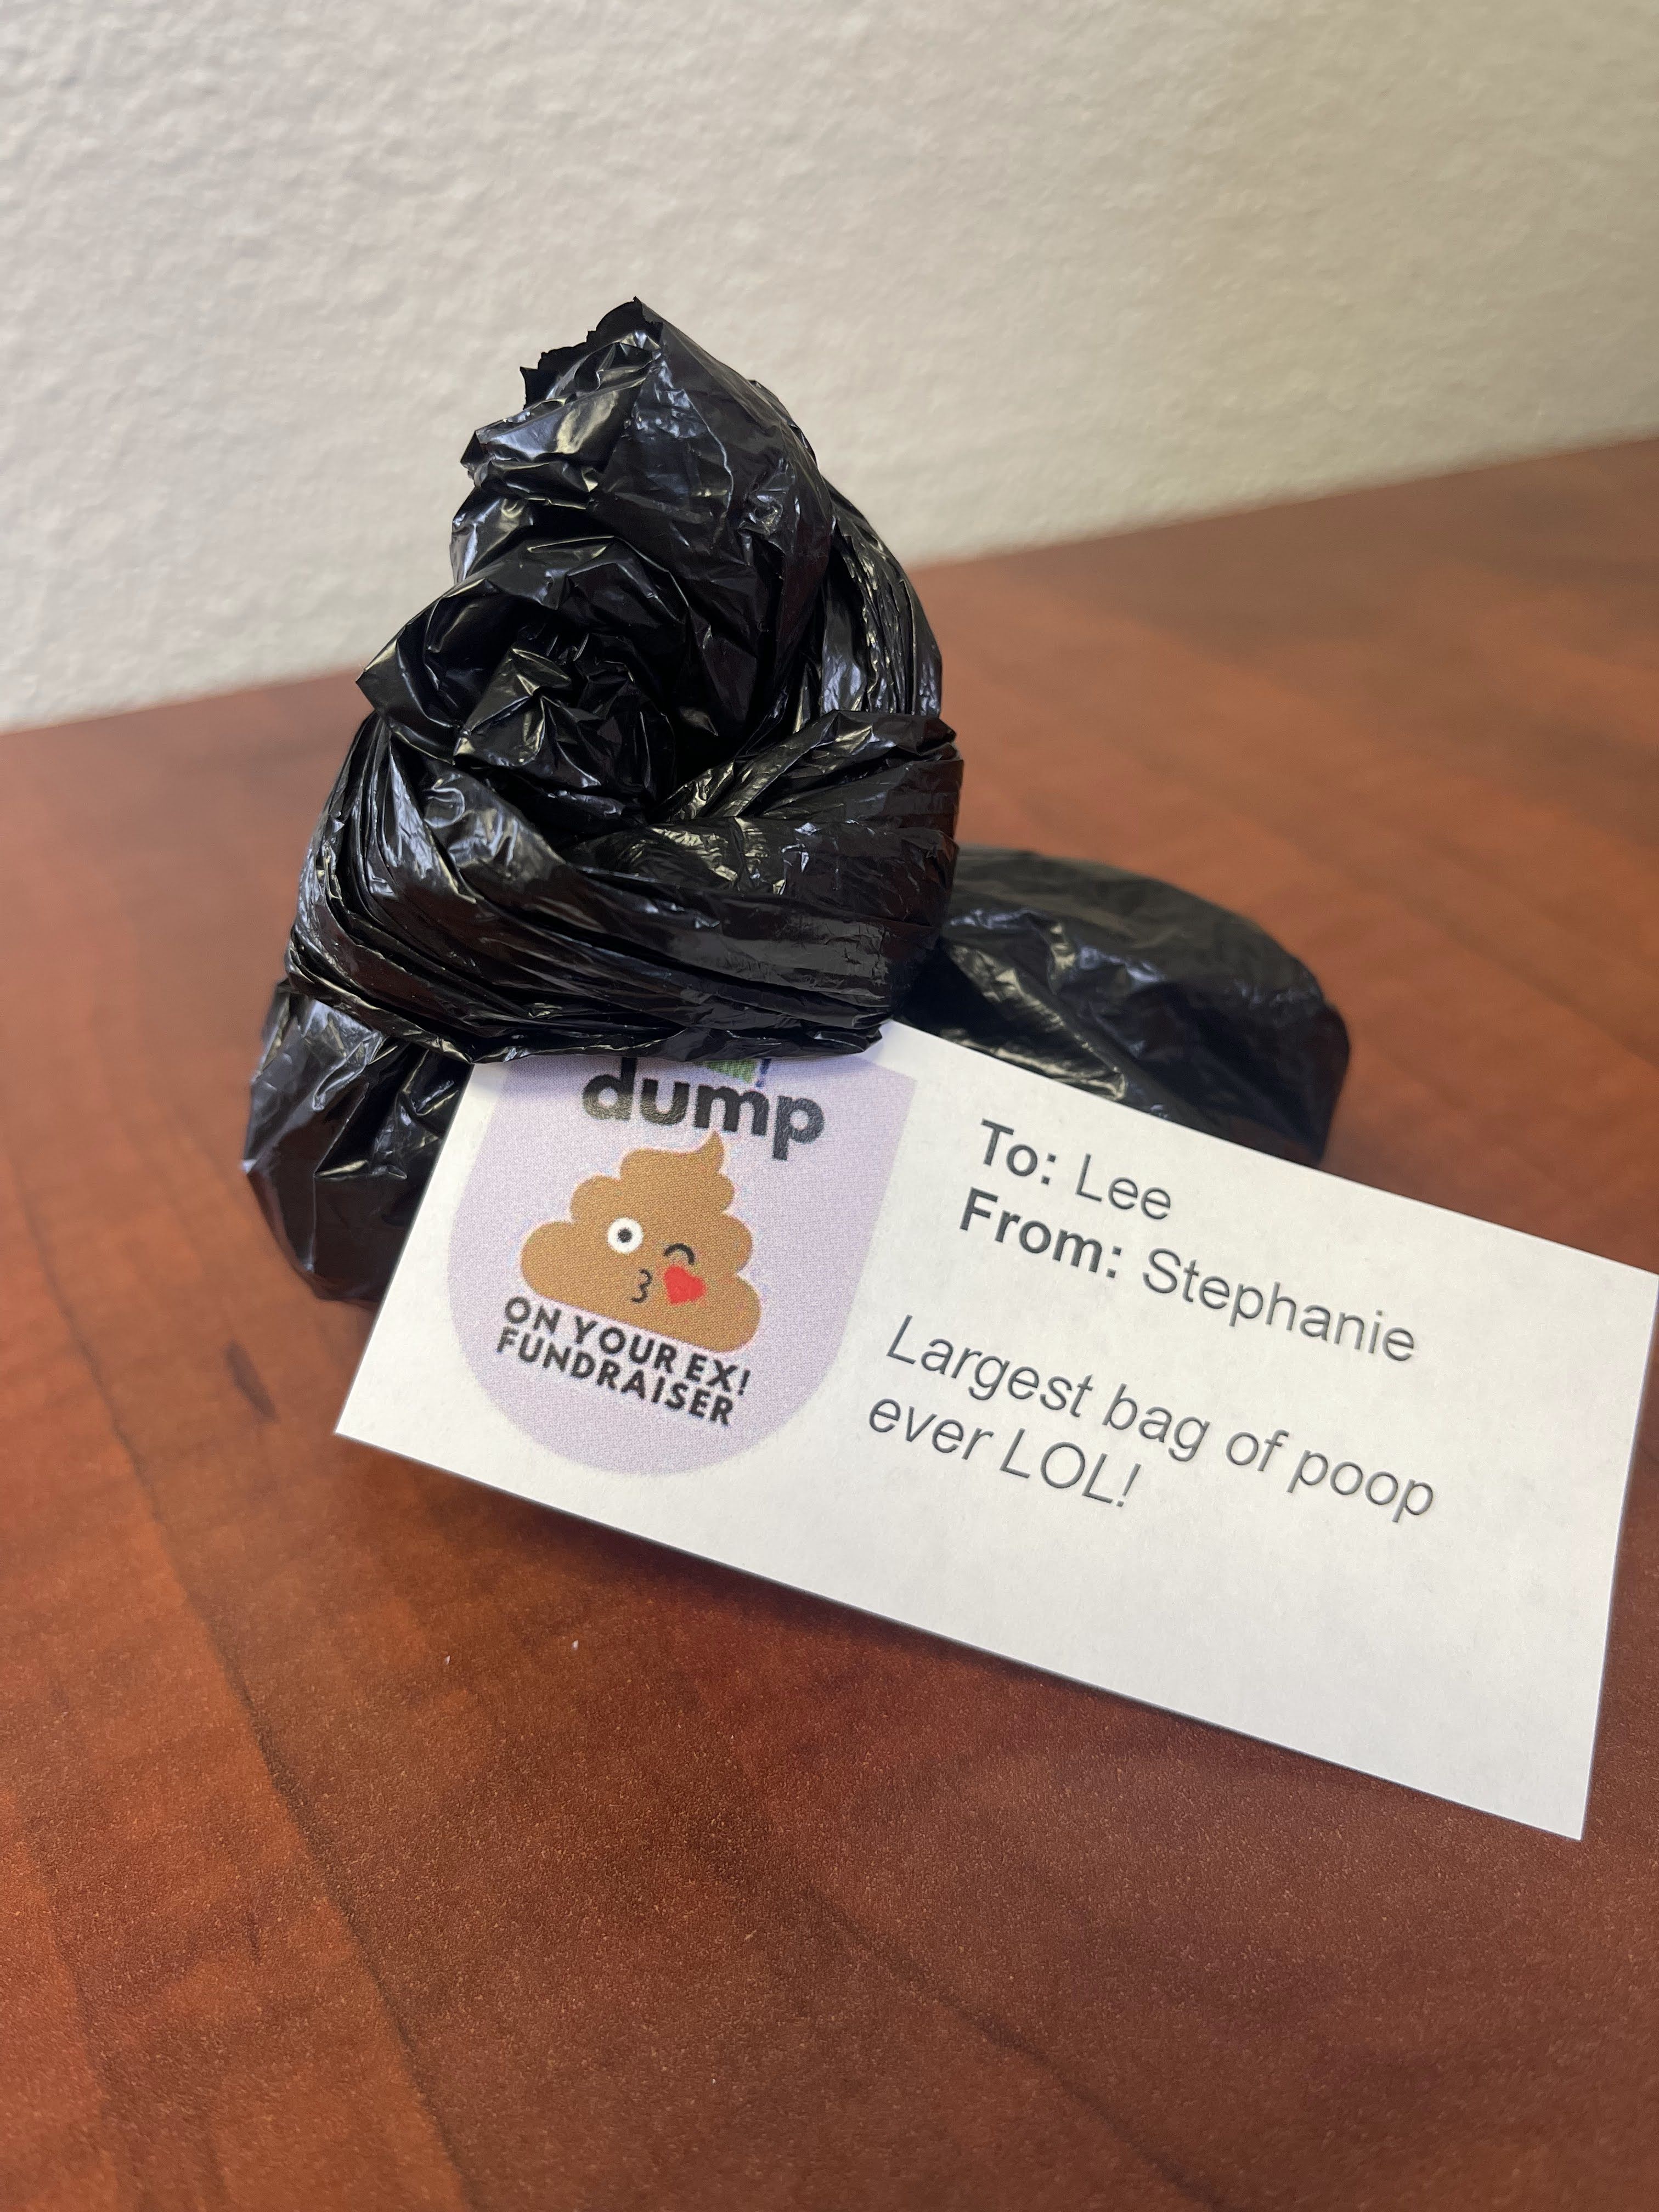 Dump On Your Ex Fundraiser - gallery image